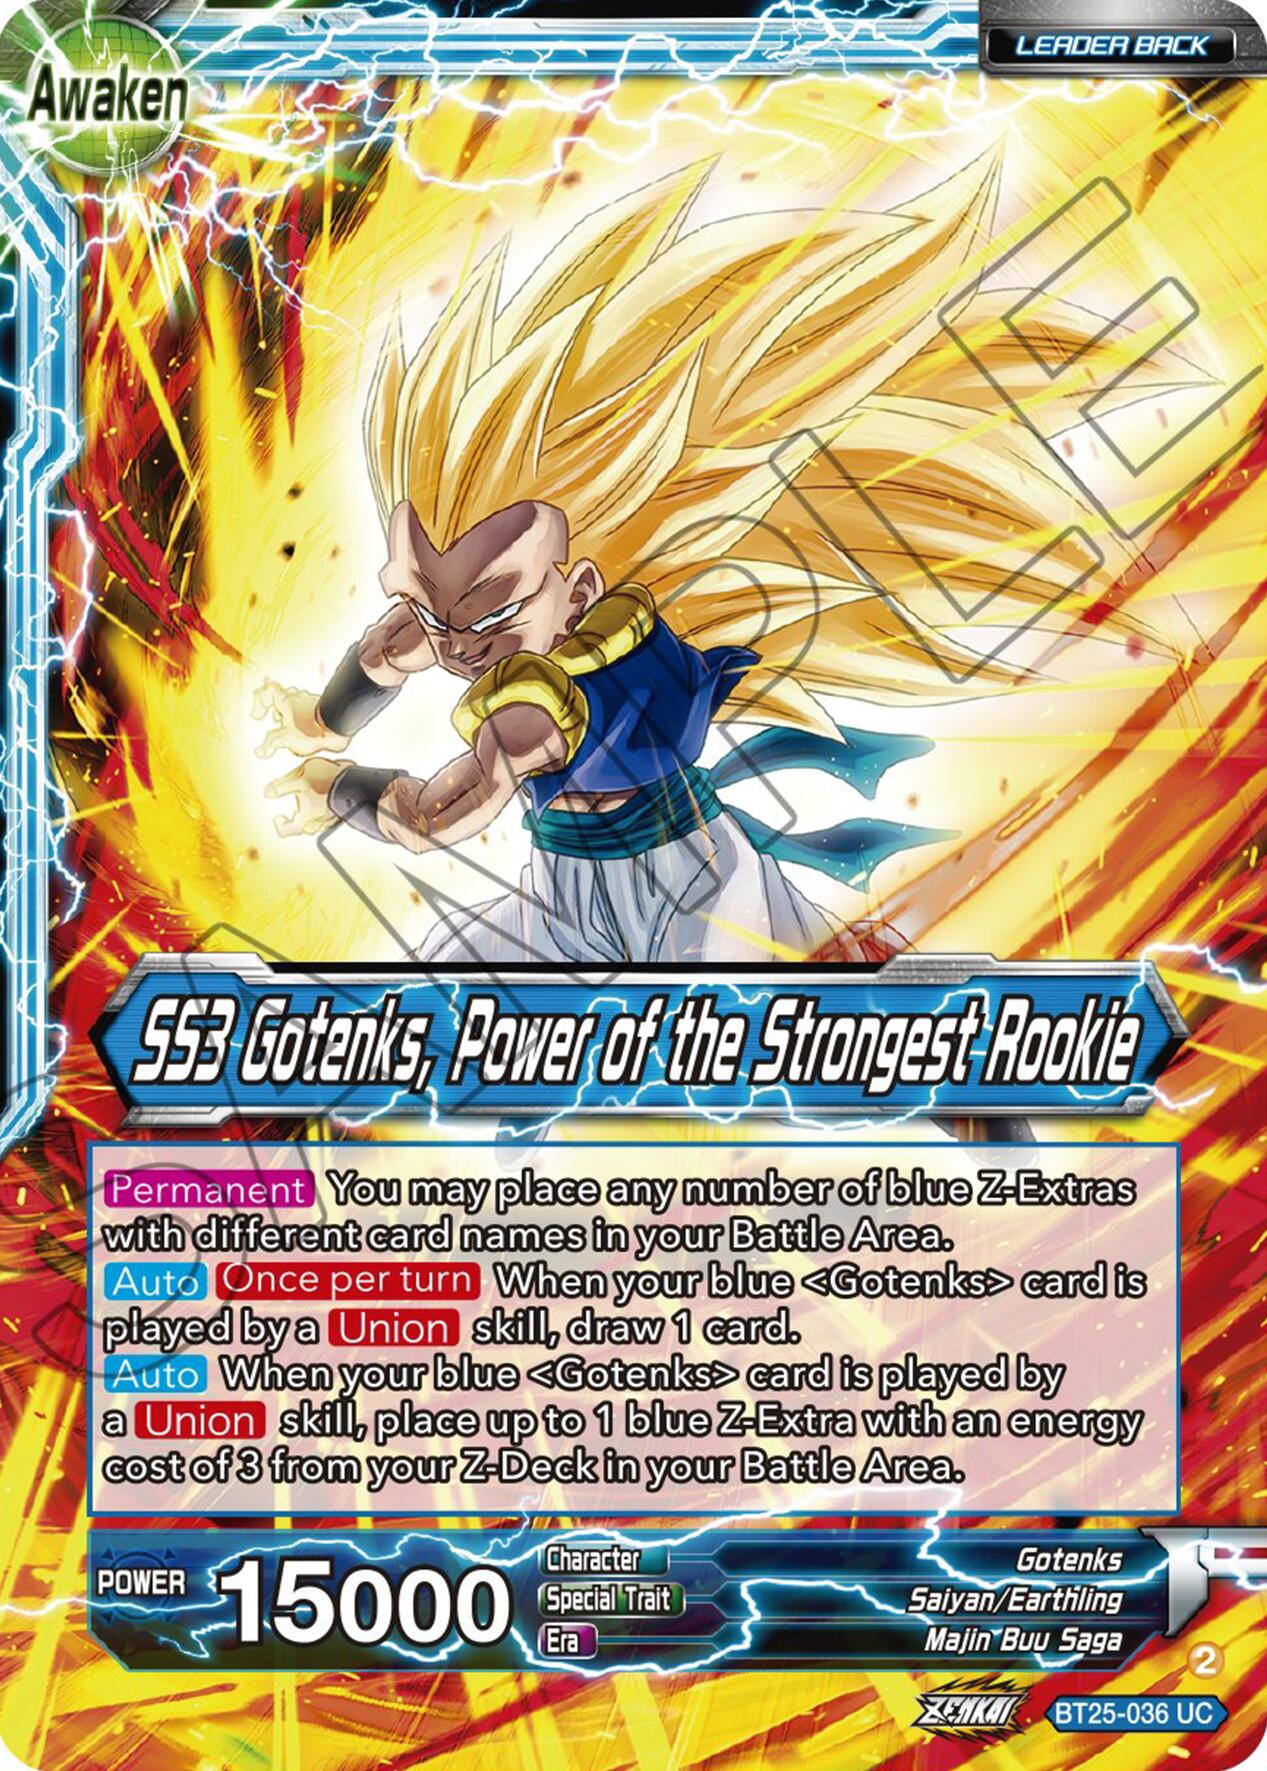 Gotenks // SS3 Gotenks, Power of the Strongest Rookie (BT25-036) [Legend of the Dragon Balls] | Pegasus Games WI